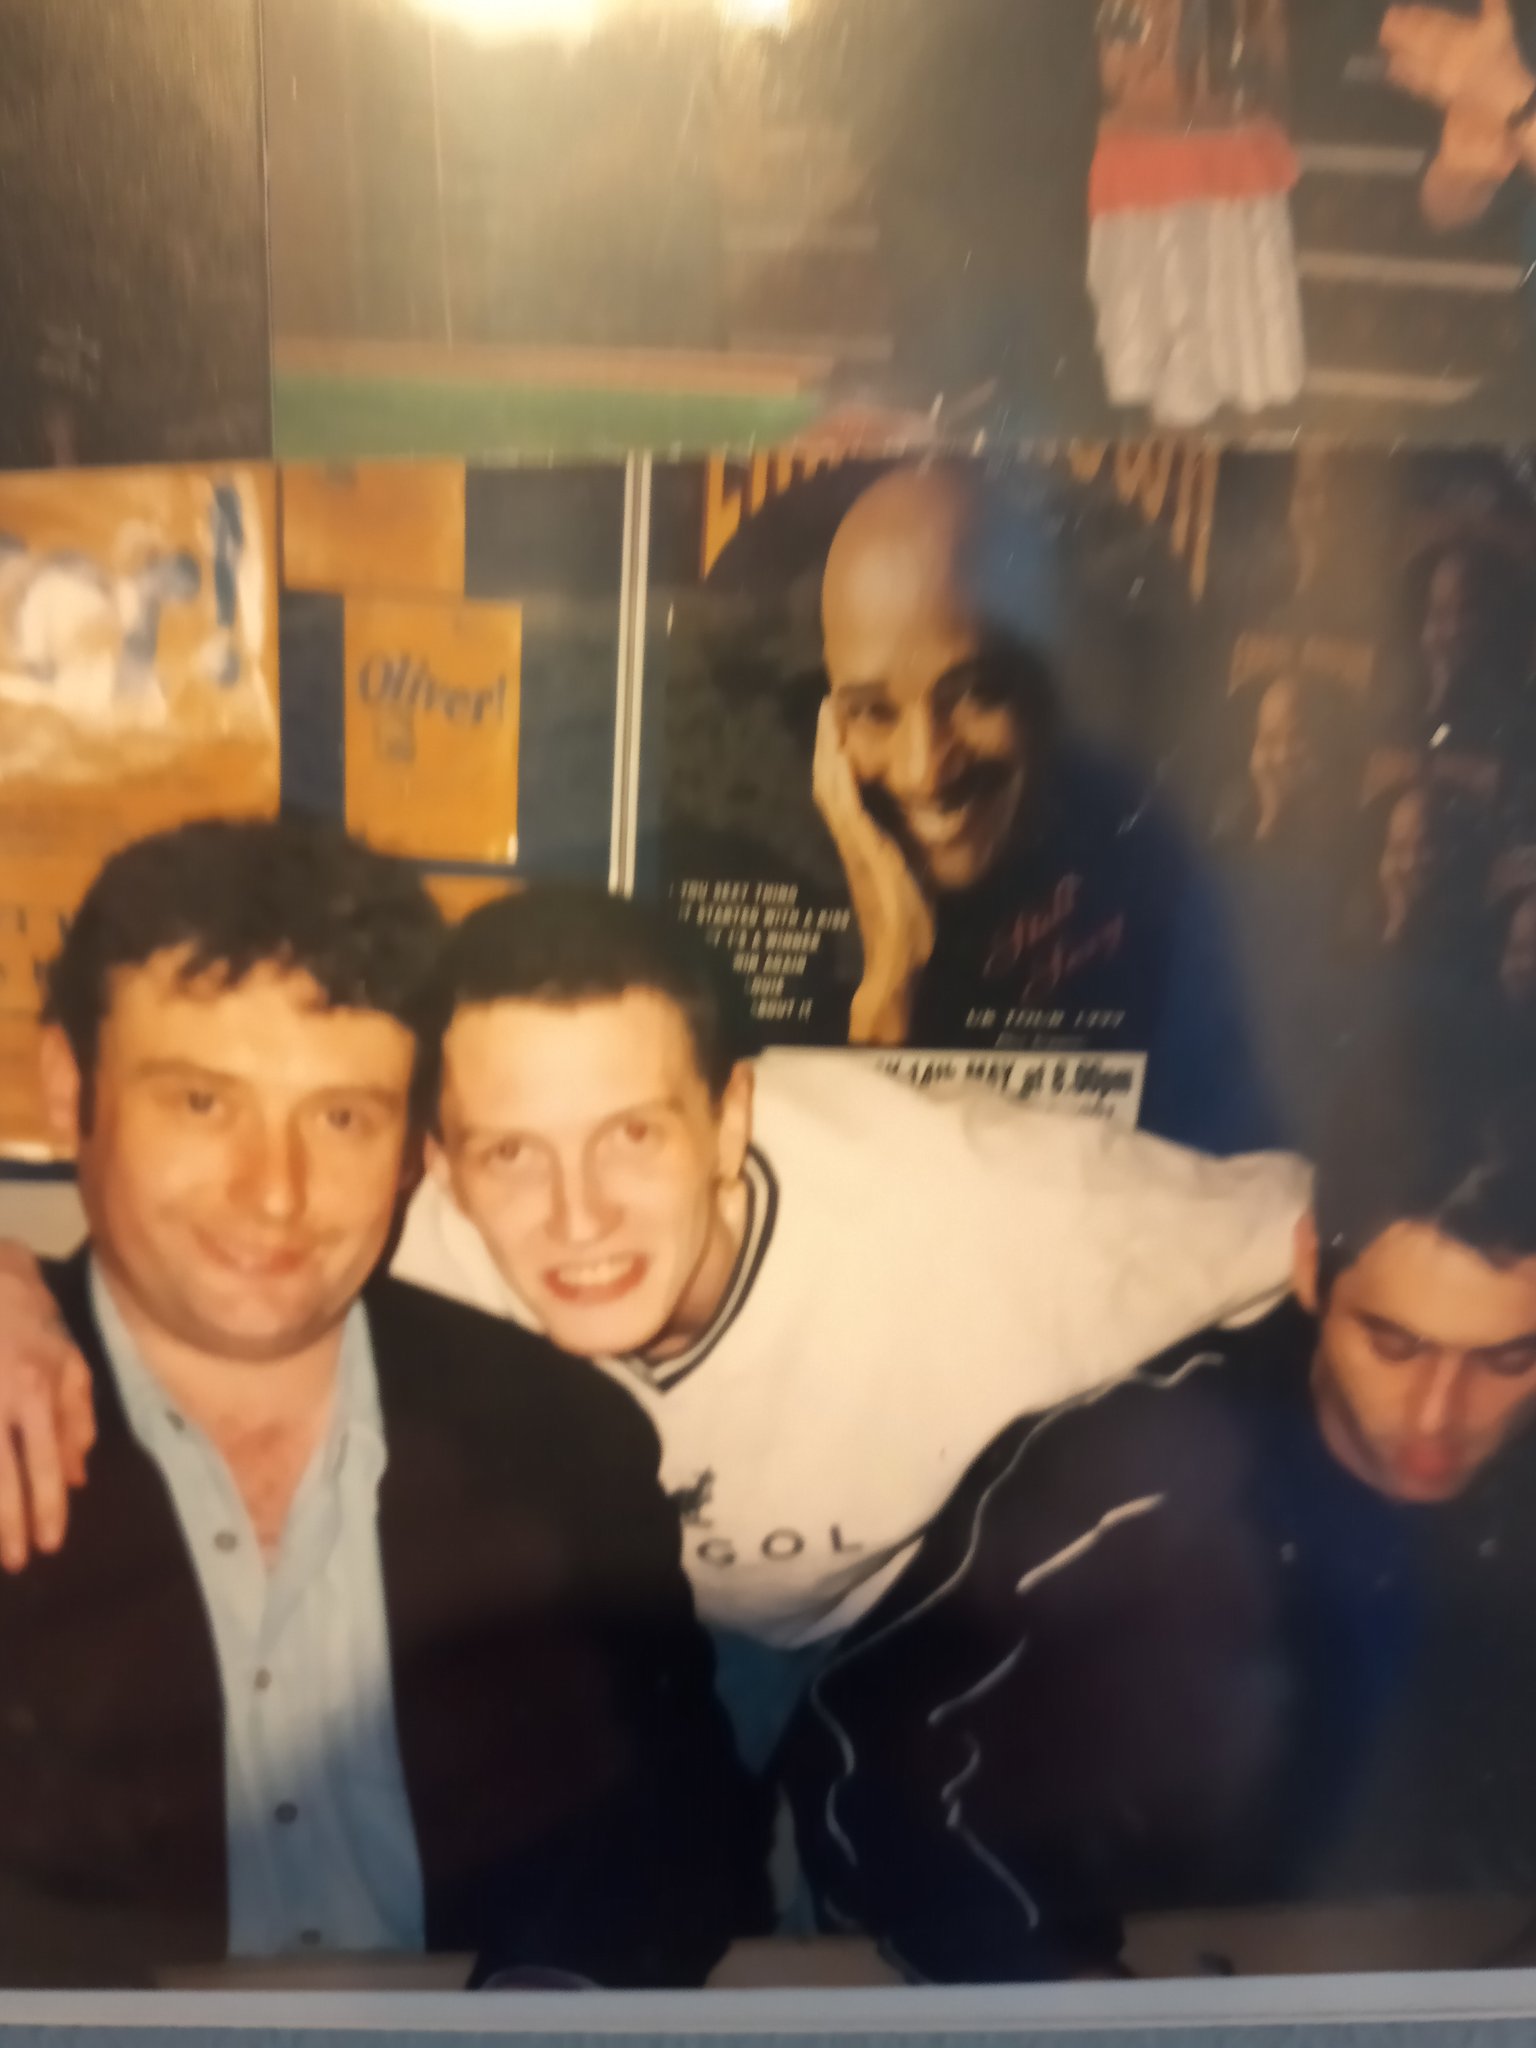  Happy birthday Jimmy white, peace and love  